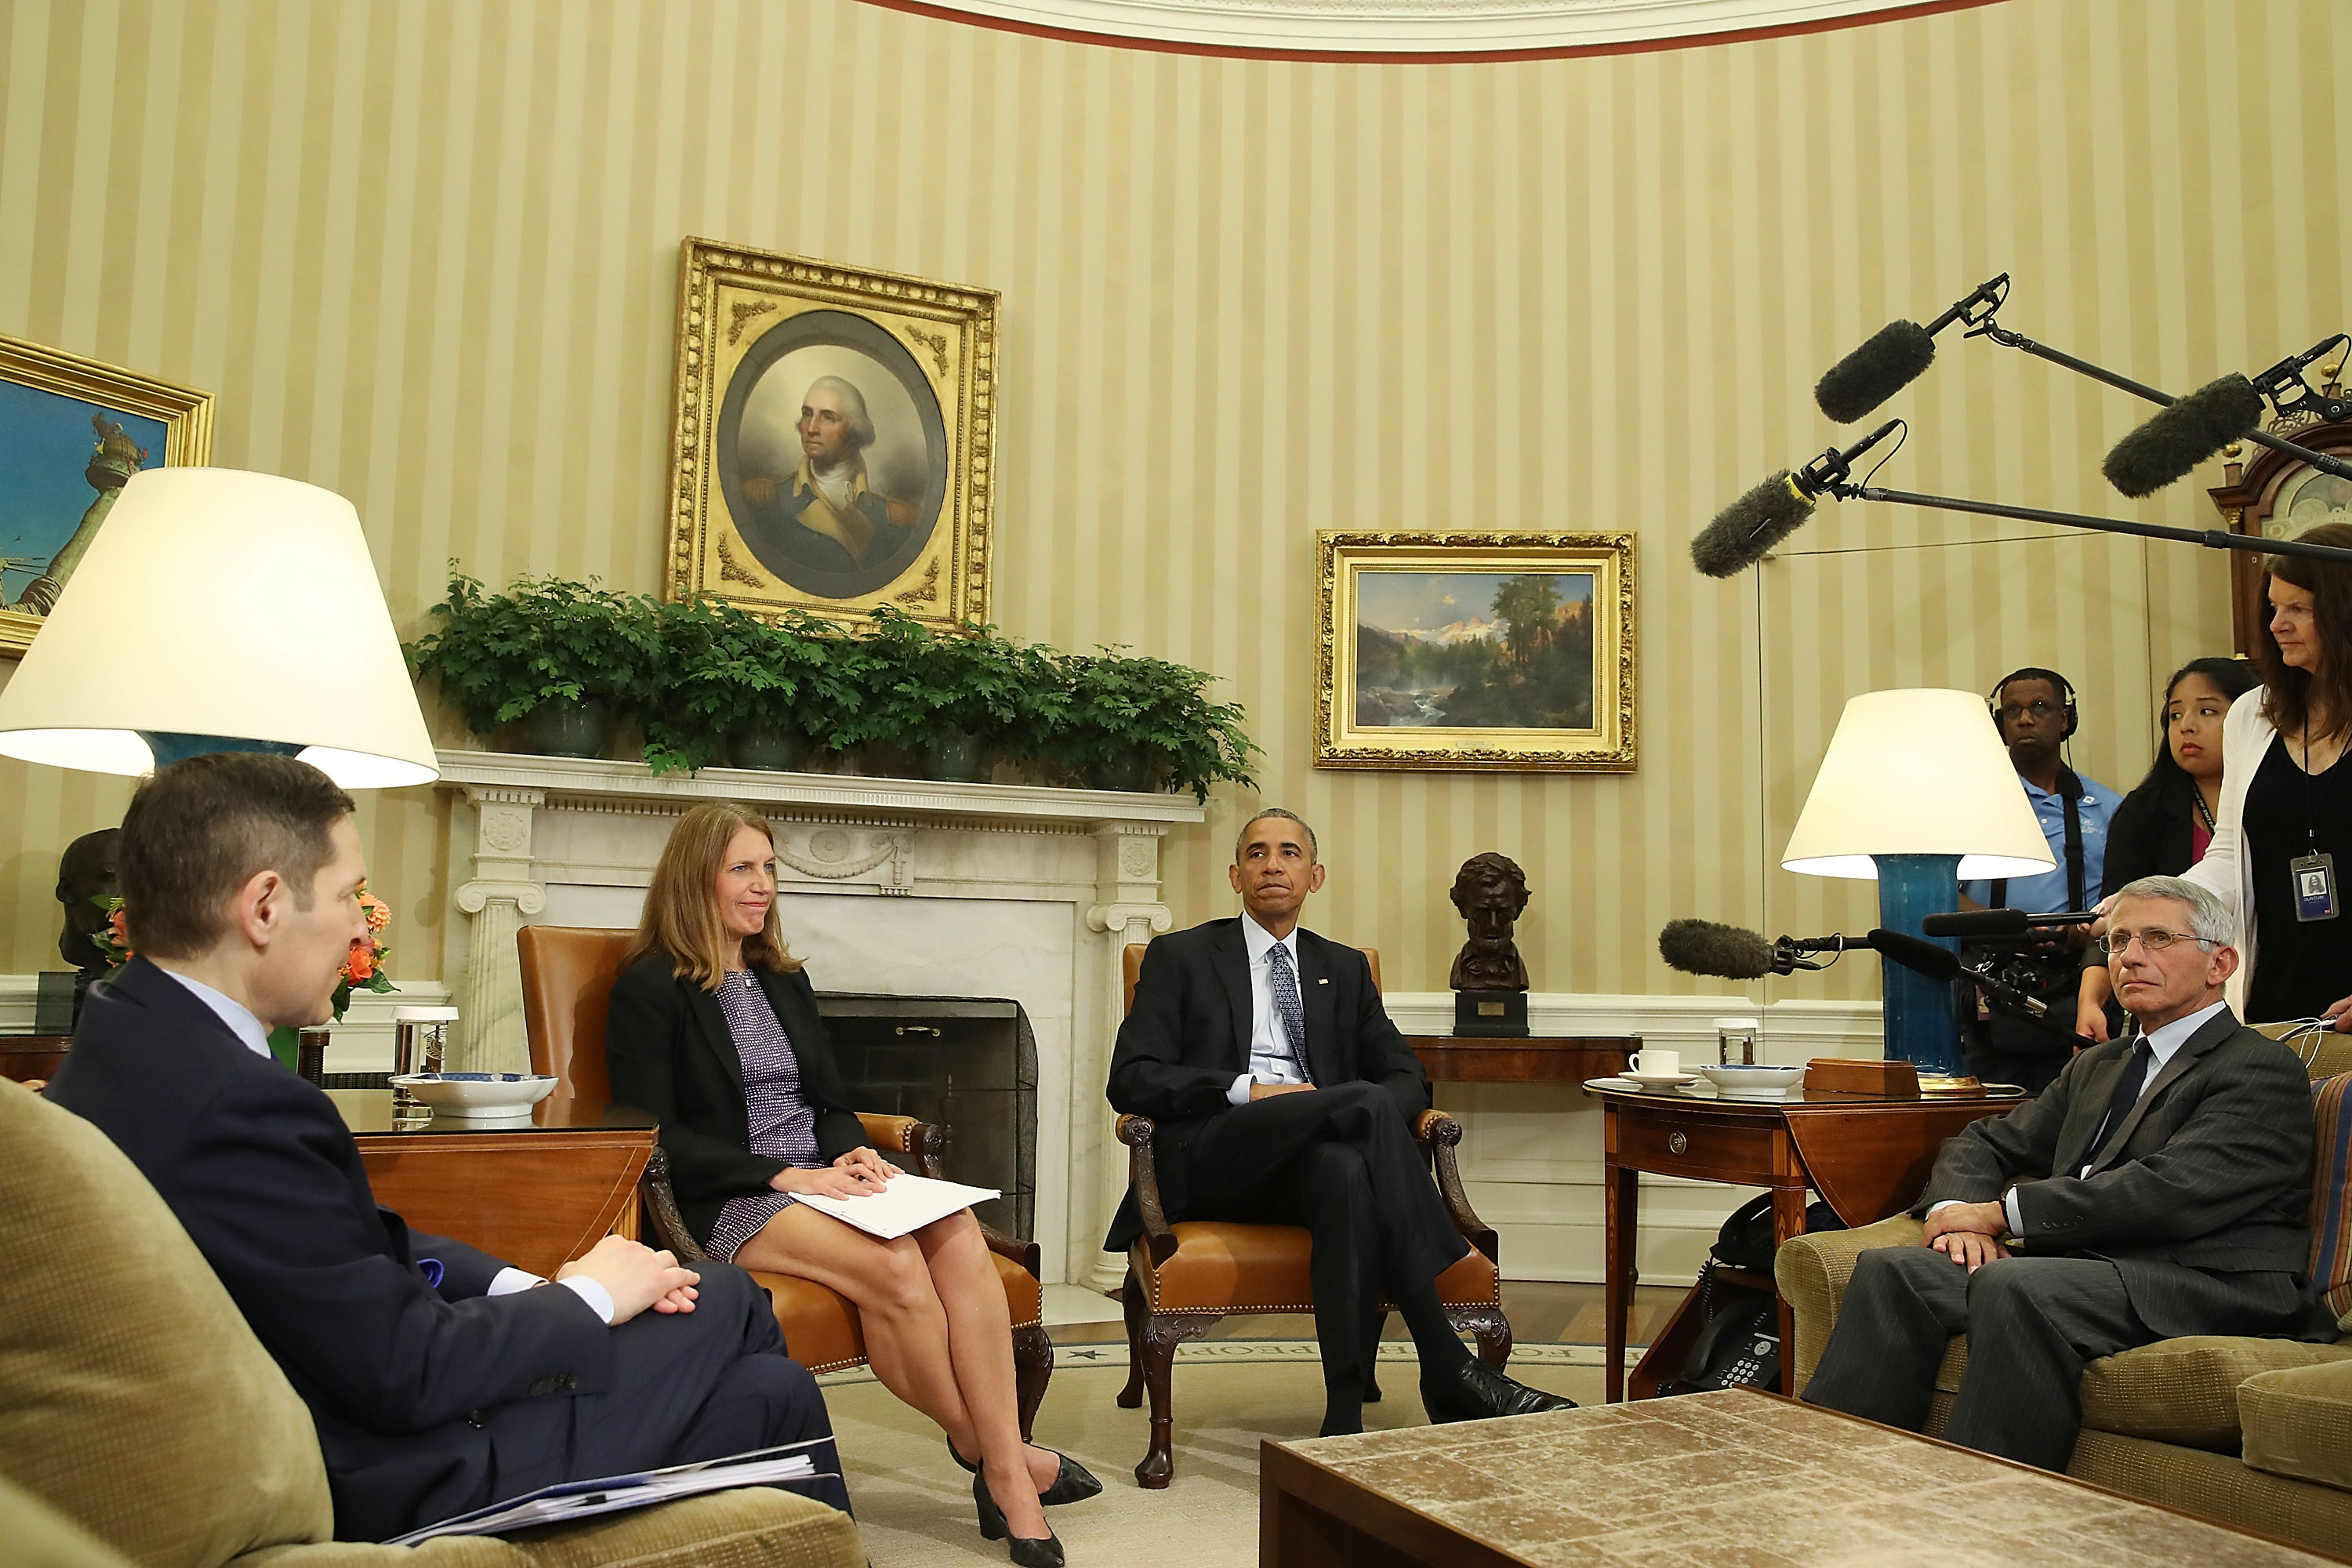 U.S. President Barack Obama speaks about the Zika virus during a meeting with health officials in the Oval Office at the White House, July 1, 2016 in Washington, DC. President Obama urged Congress to pass a Zika virus funding bill before going on break. Also pictured are, Secretary of Health and Human Services Sylvia Mathews Burwell, (2-L), Director of NIH/NIAID Dr. Anthony Fauci, (R), Director of the Centers for Disease Control and Prevention Dr. Tom Frieden. (L). Mark Wilson&mdash;Getty Images (Mark Wilson&mdash;Getty Images)